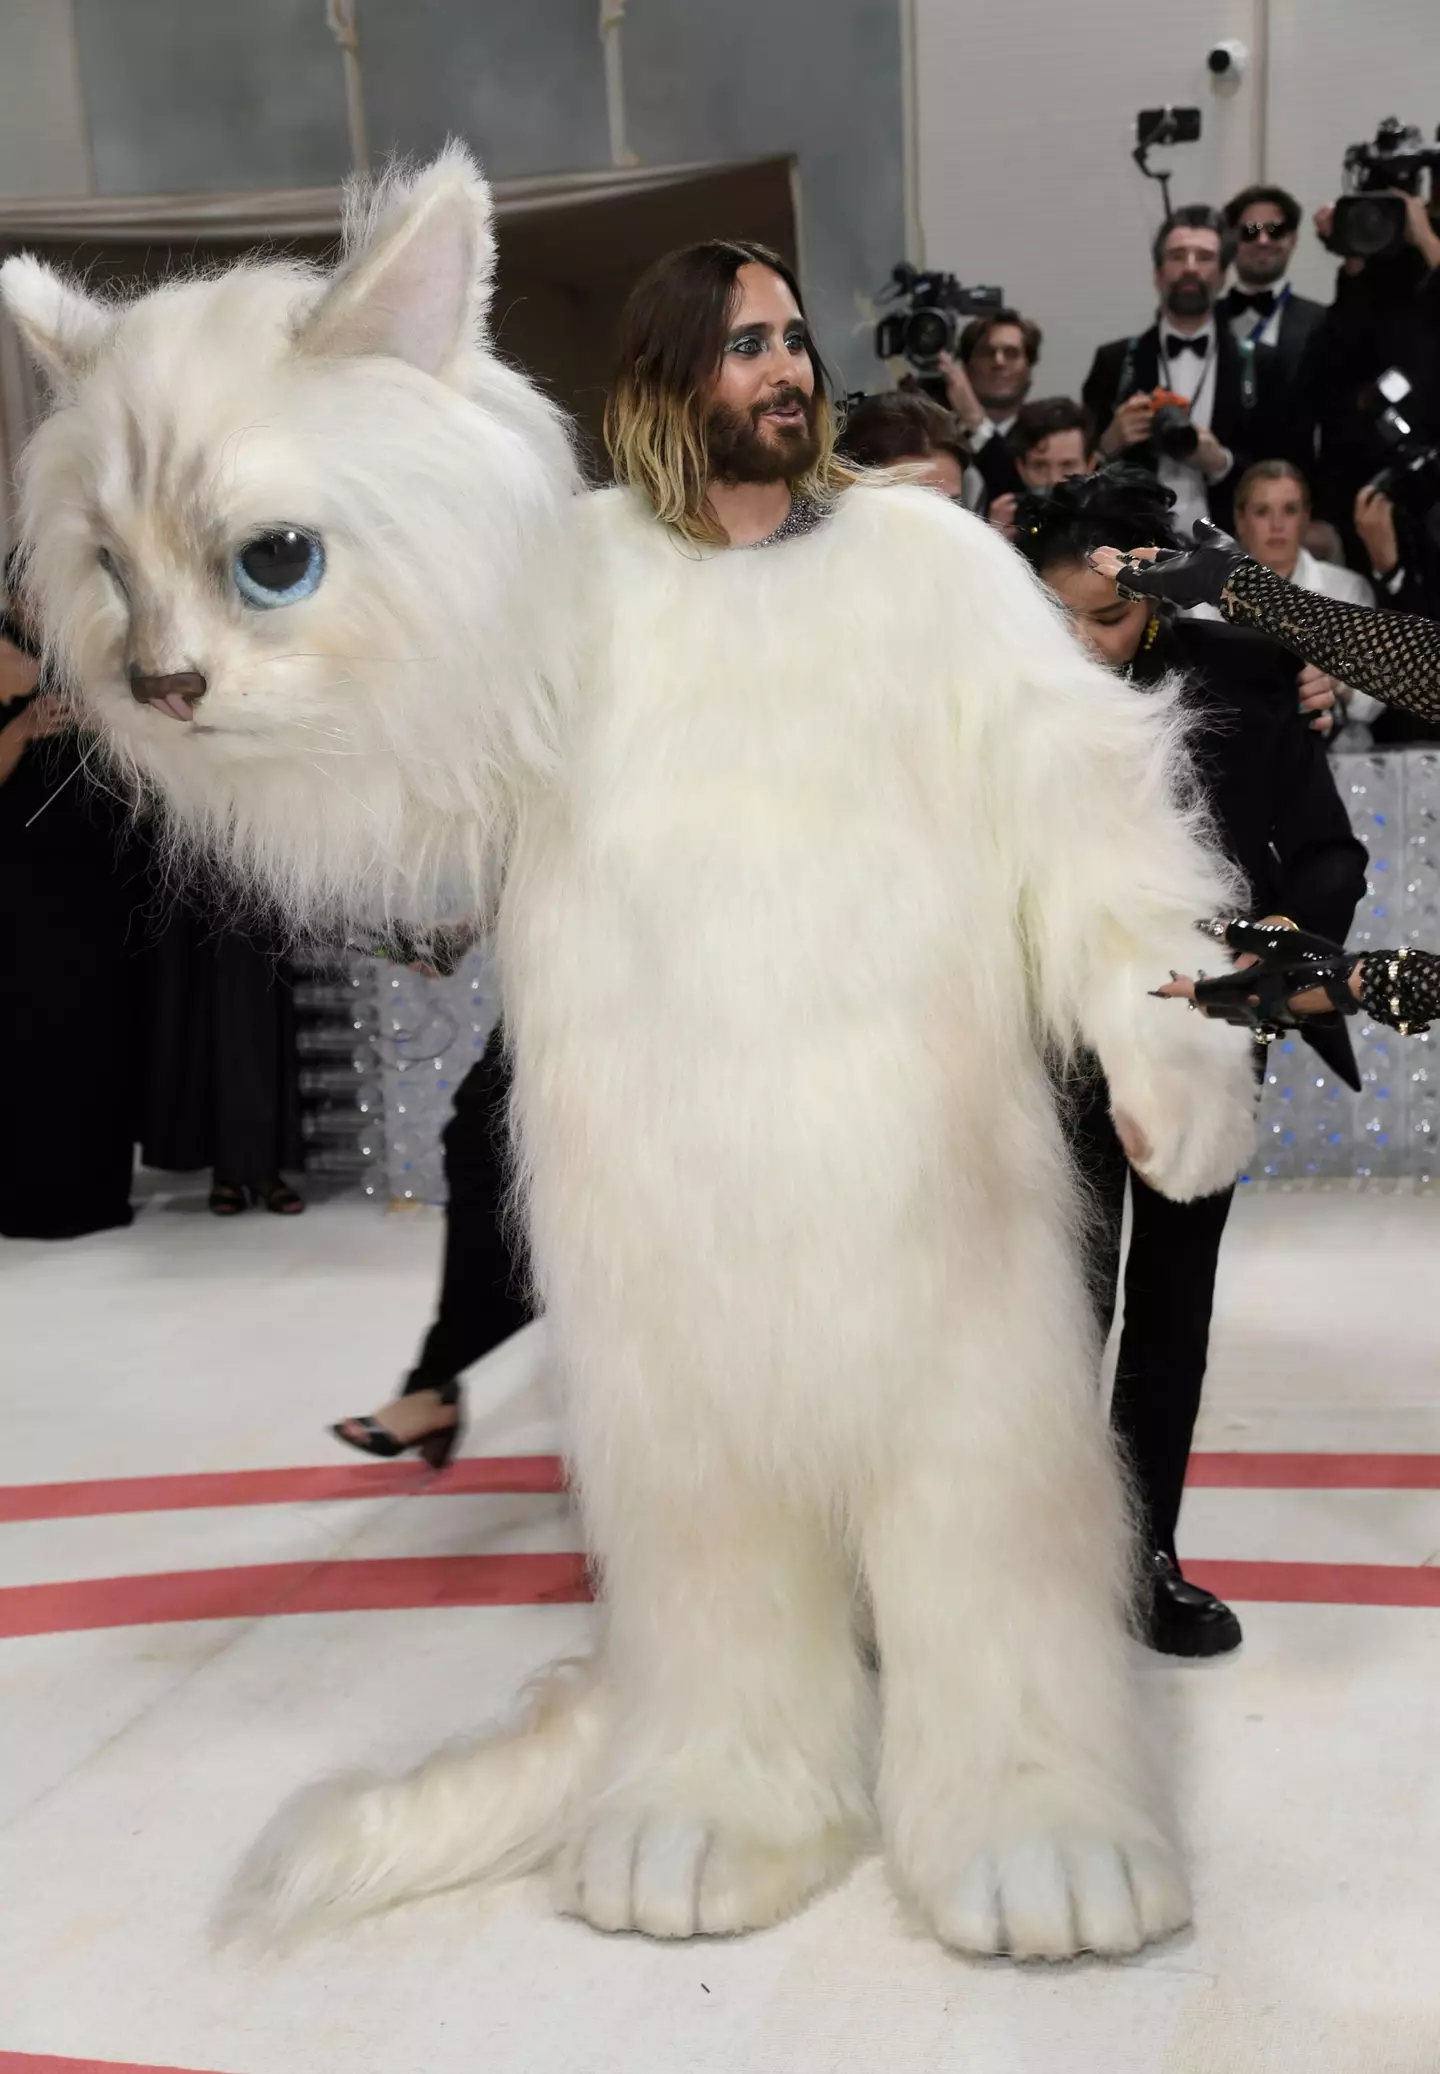 The actor and musician was wearing the costume as tribute to Karl Lagerfeld's cat Choupette.